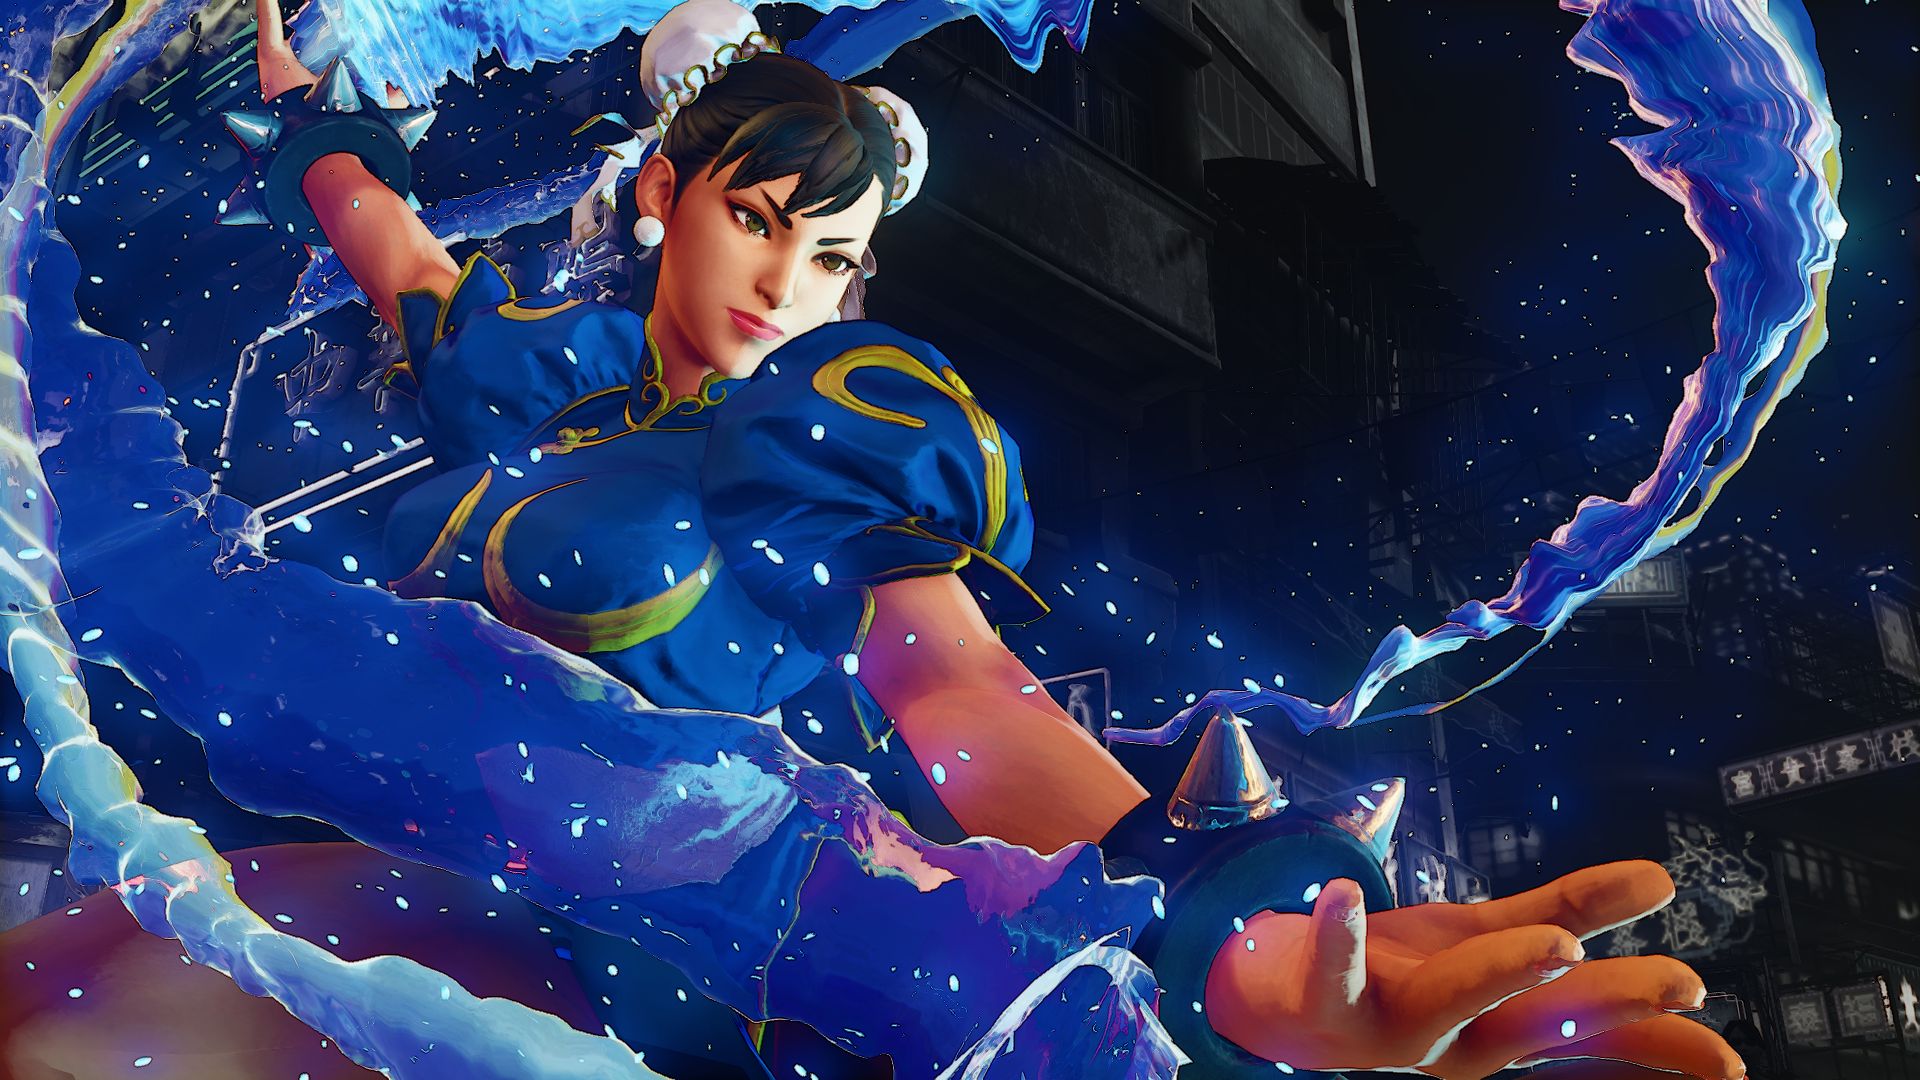 New Vega classic stage, balance change updates, return of the Thailand  stage, coming to Street Fighter 5 on May 30th